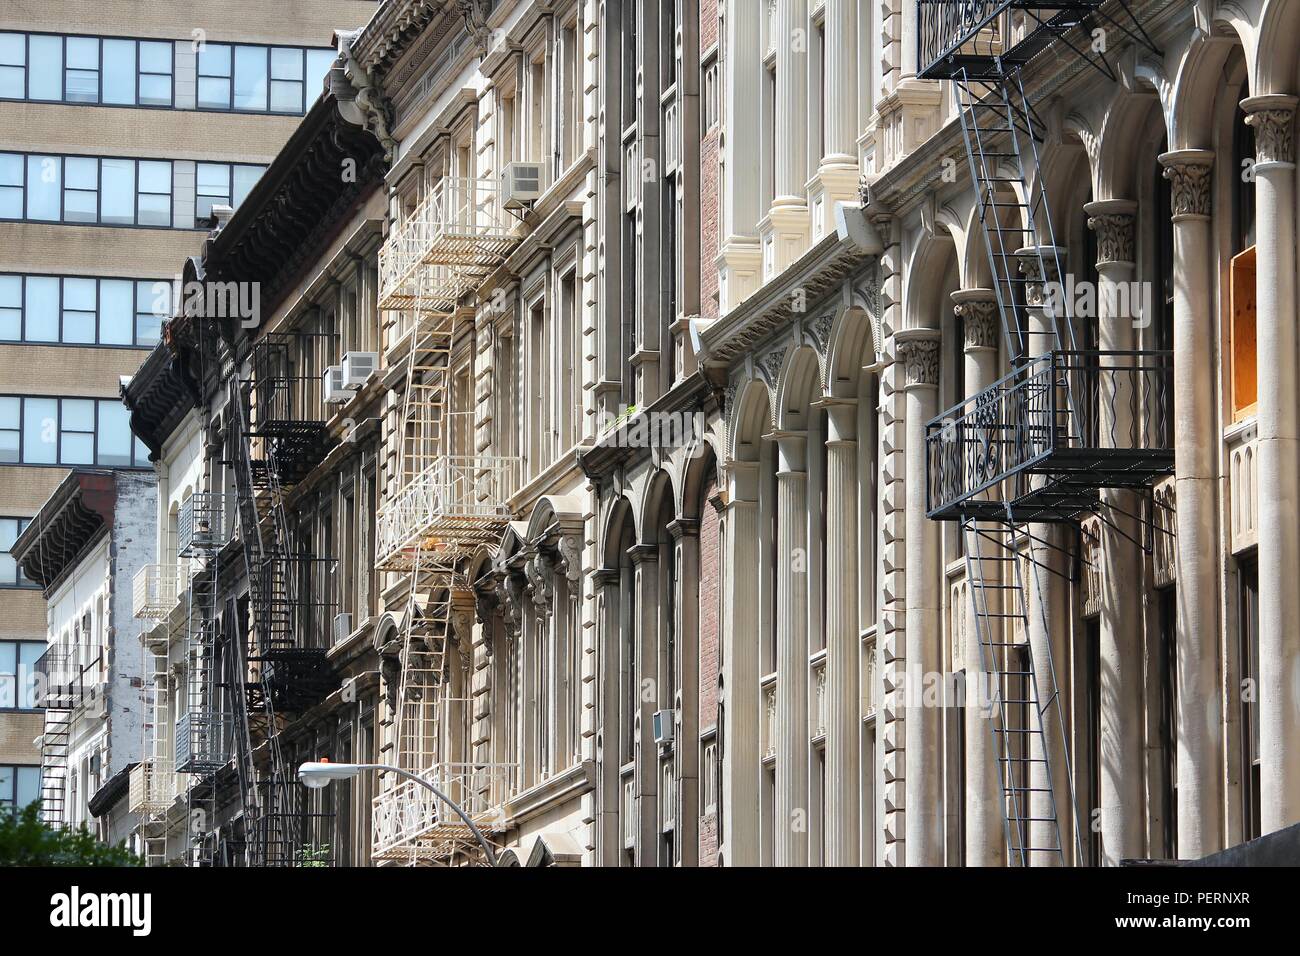 New York City, United States - old residential building in SoHo, Lower Manhattan. Stock Photo